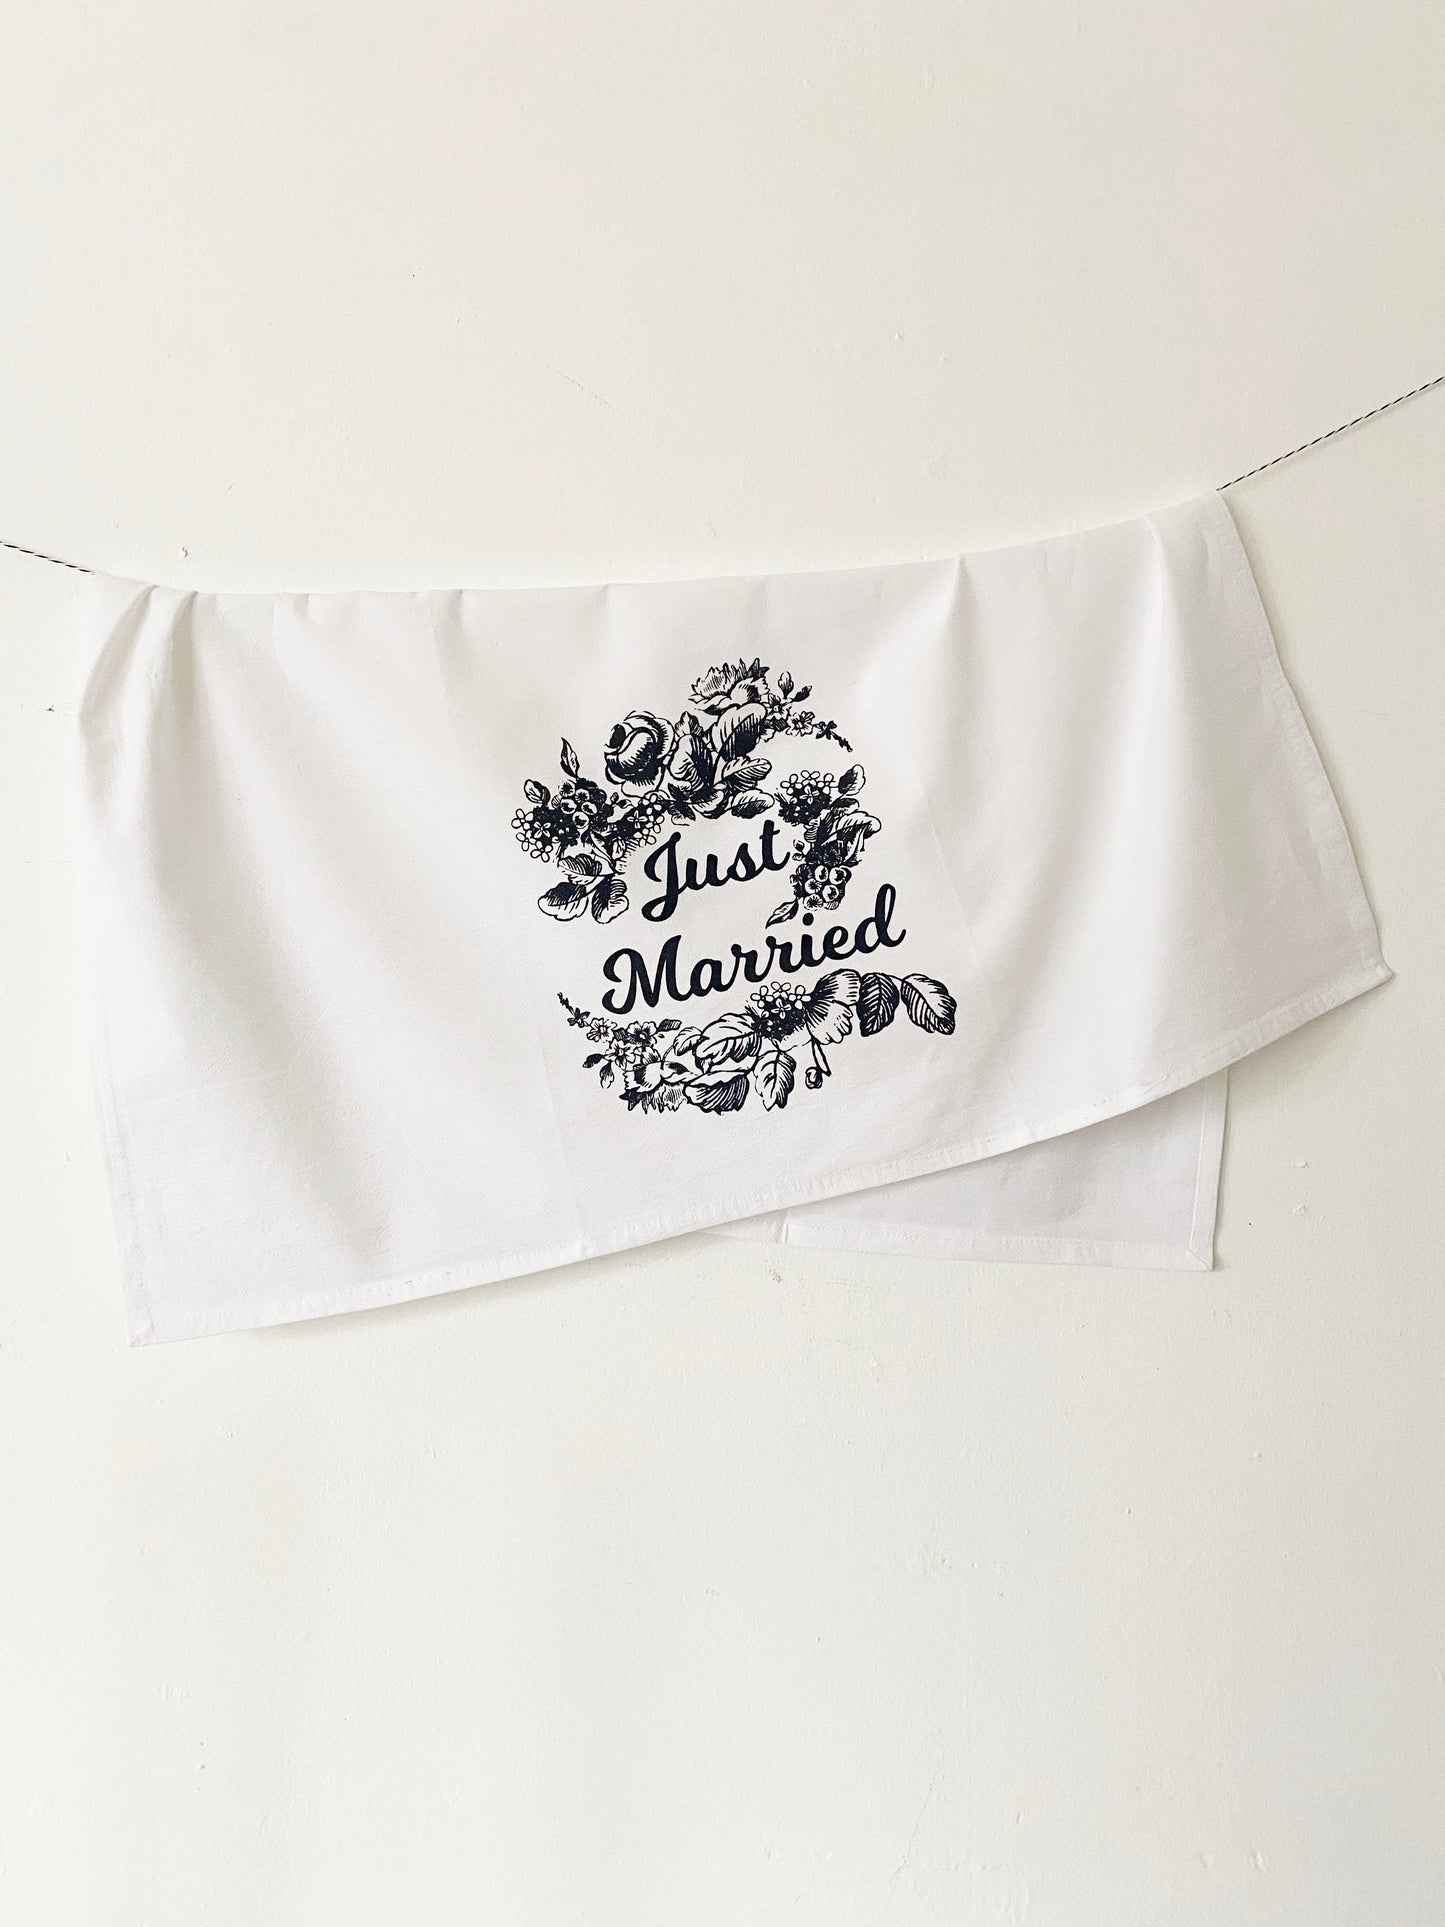 screen print cotton dish towel just married wedding engagement gift black and white screen print flowers just married fun tea towels coin laundry montana 